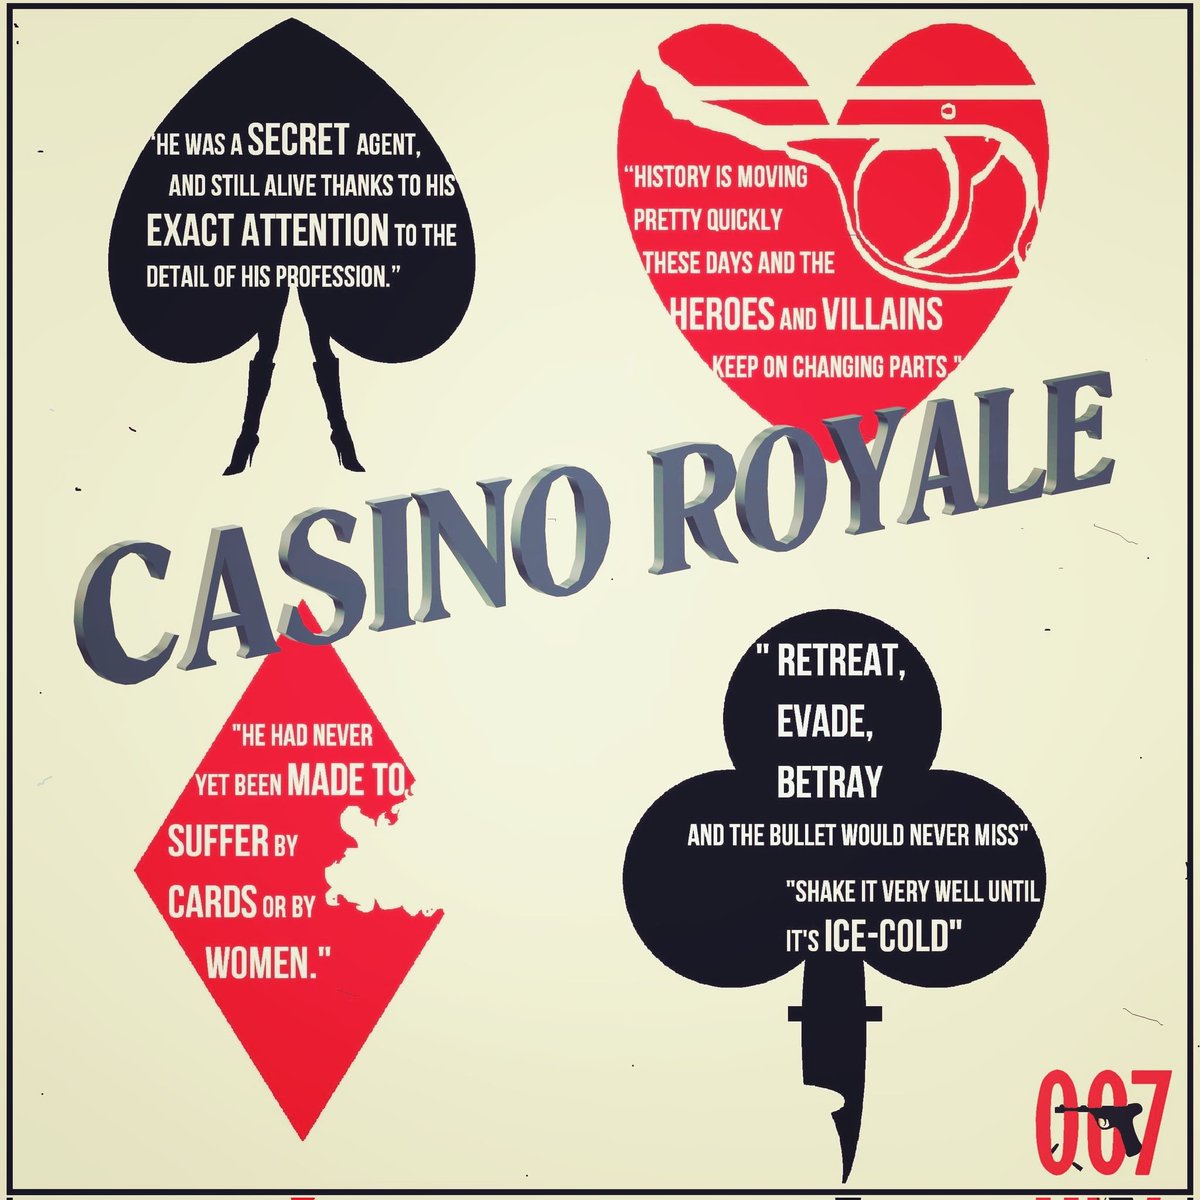 71 years ago today, CASINO ROYALE was published. As speculation about the 007th 007 puts Bond back in the crosshairs, a new novel is in the gunbarrel & the world's villains seem Cold War familiar, CASINO ROYALE's 71-year-old legacy has yet to miss its target. #JamesBond #Bond26